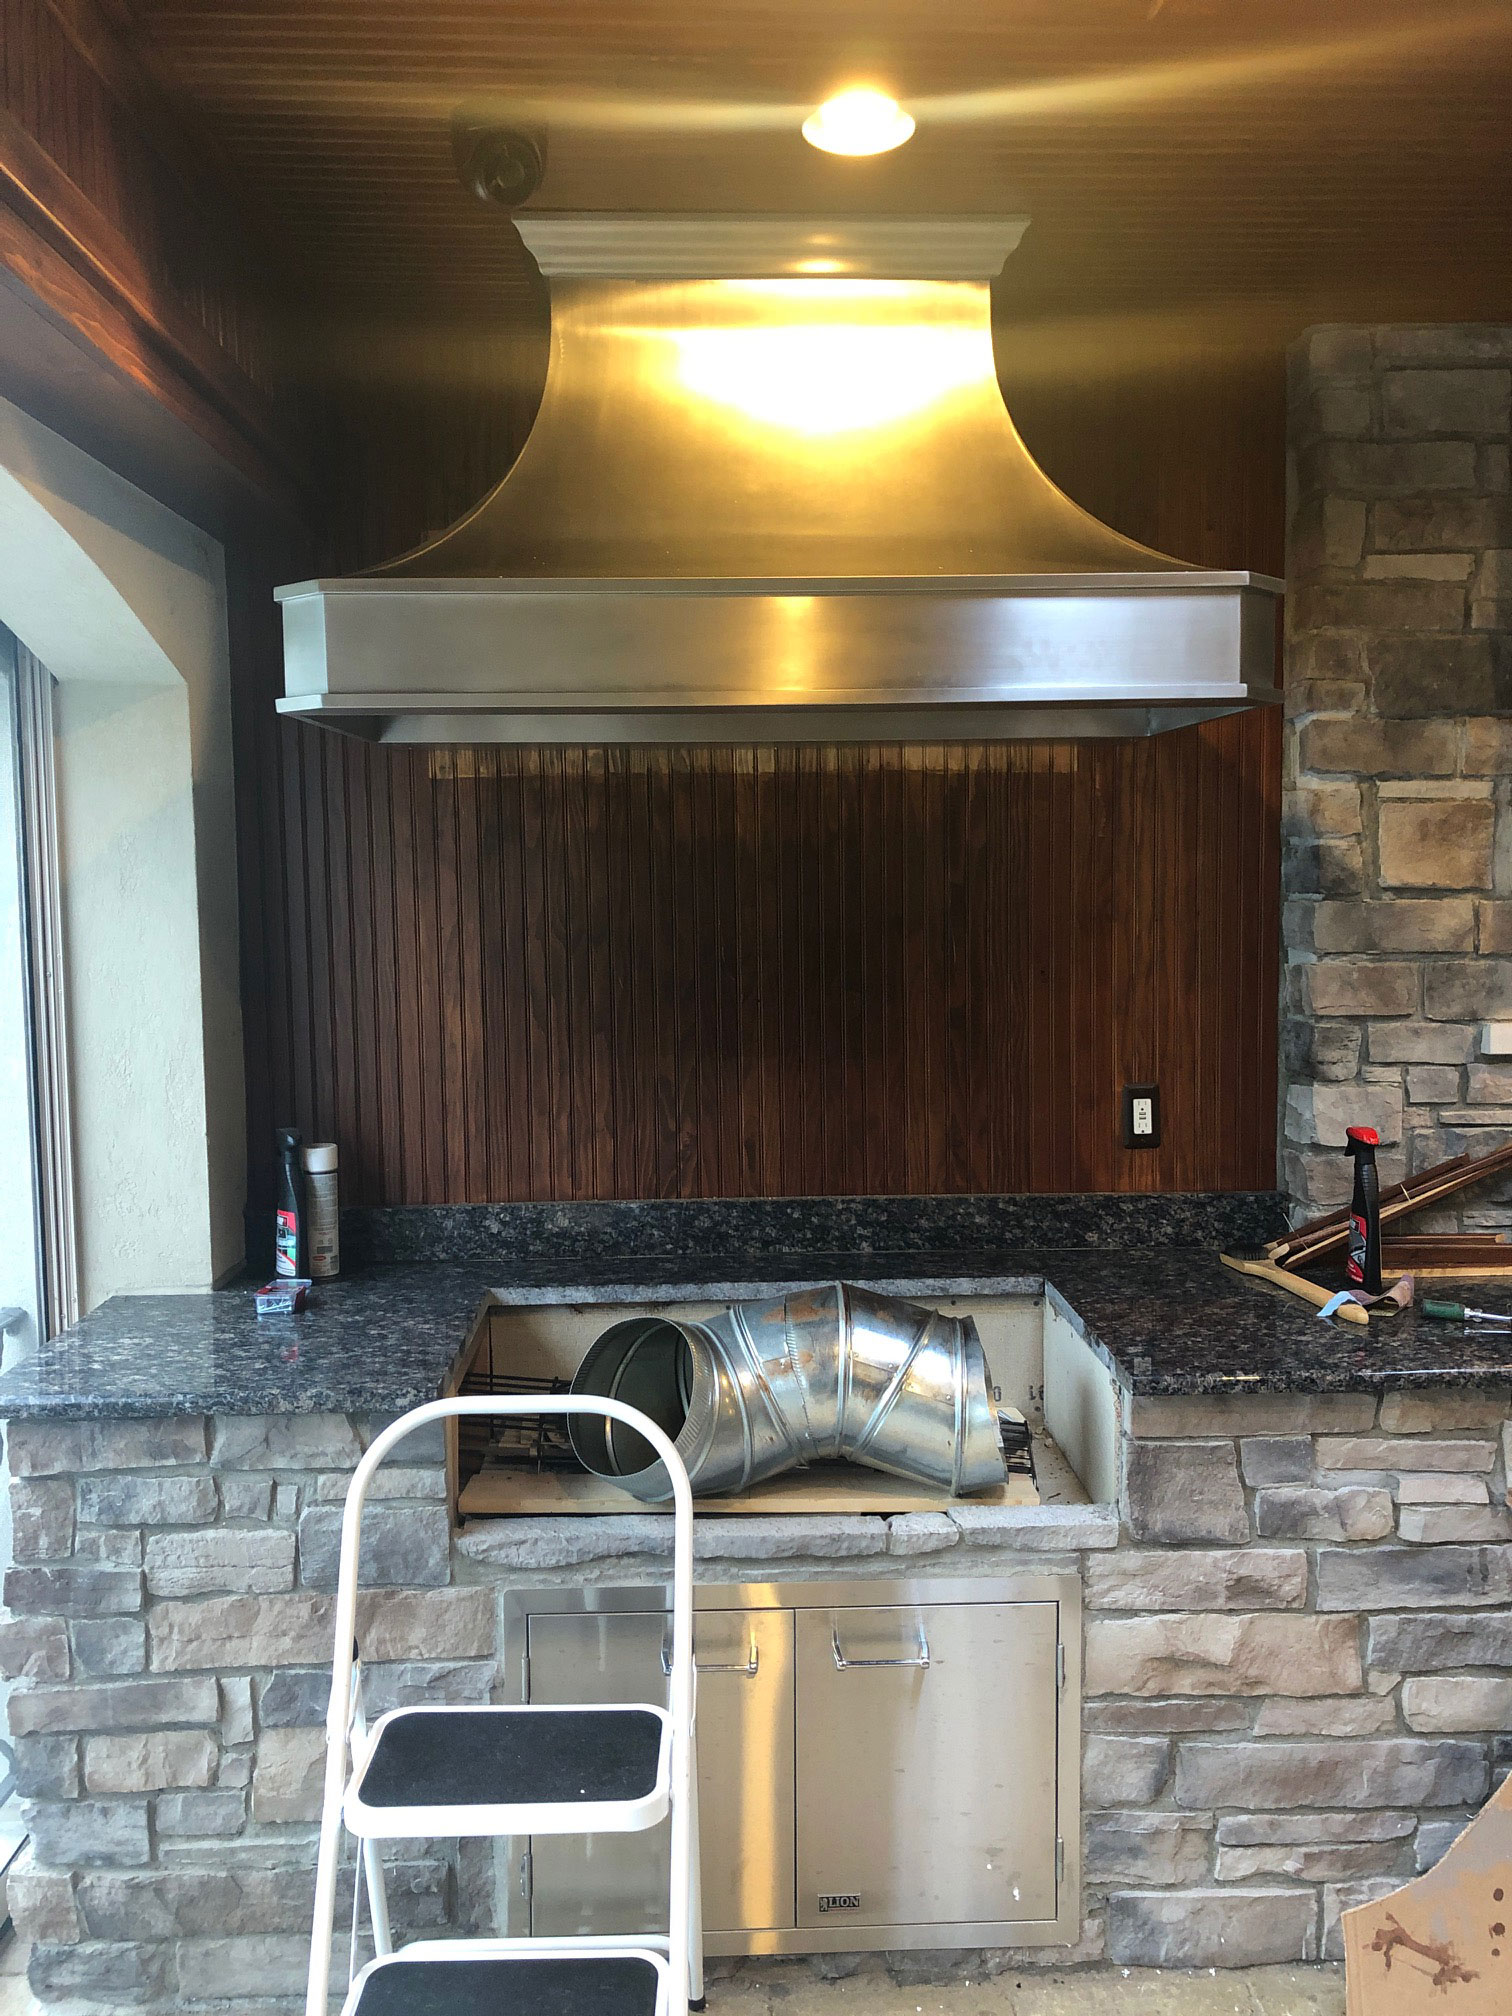 Stainless steel range hood with geometric bell shape in the kitchen with wood paneling